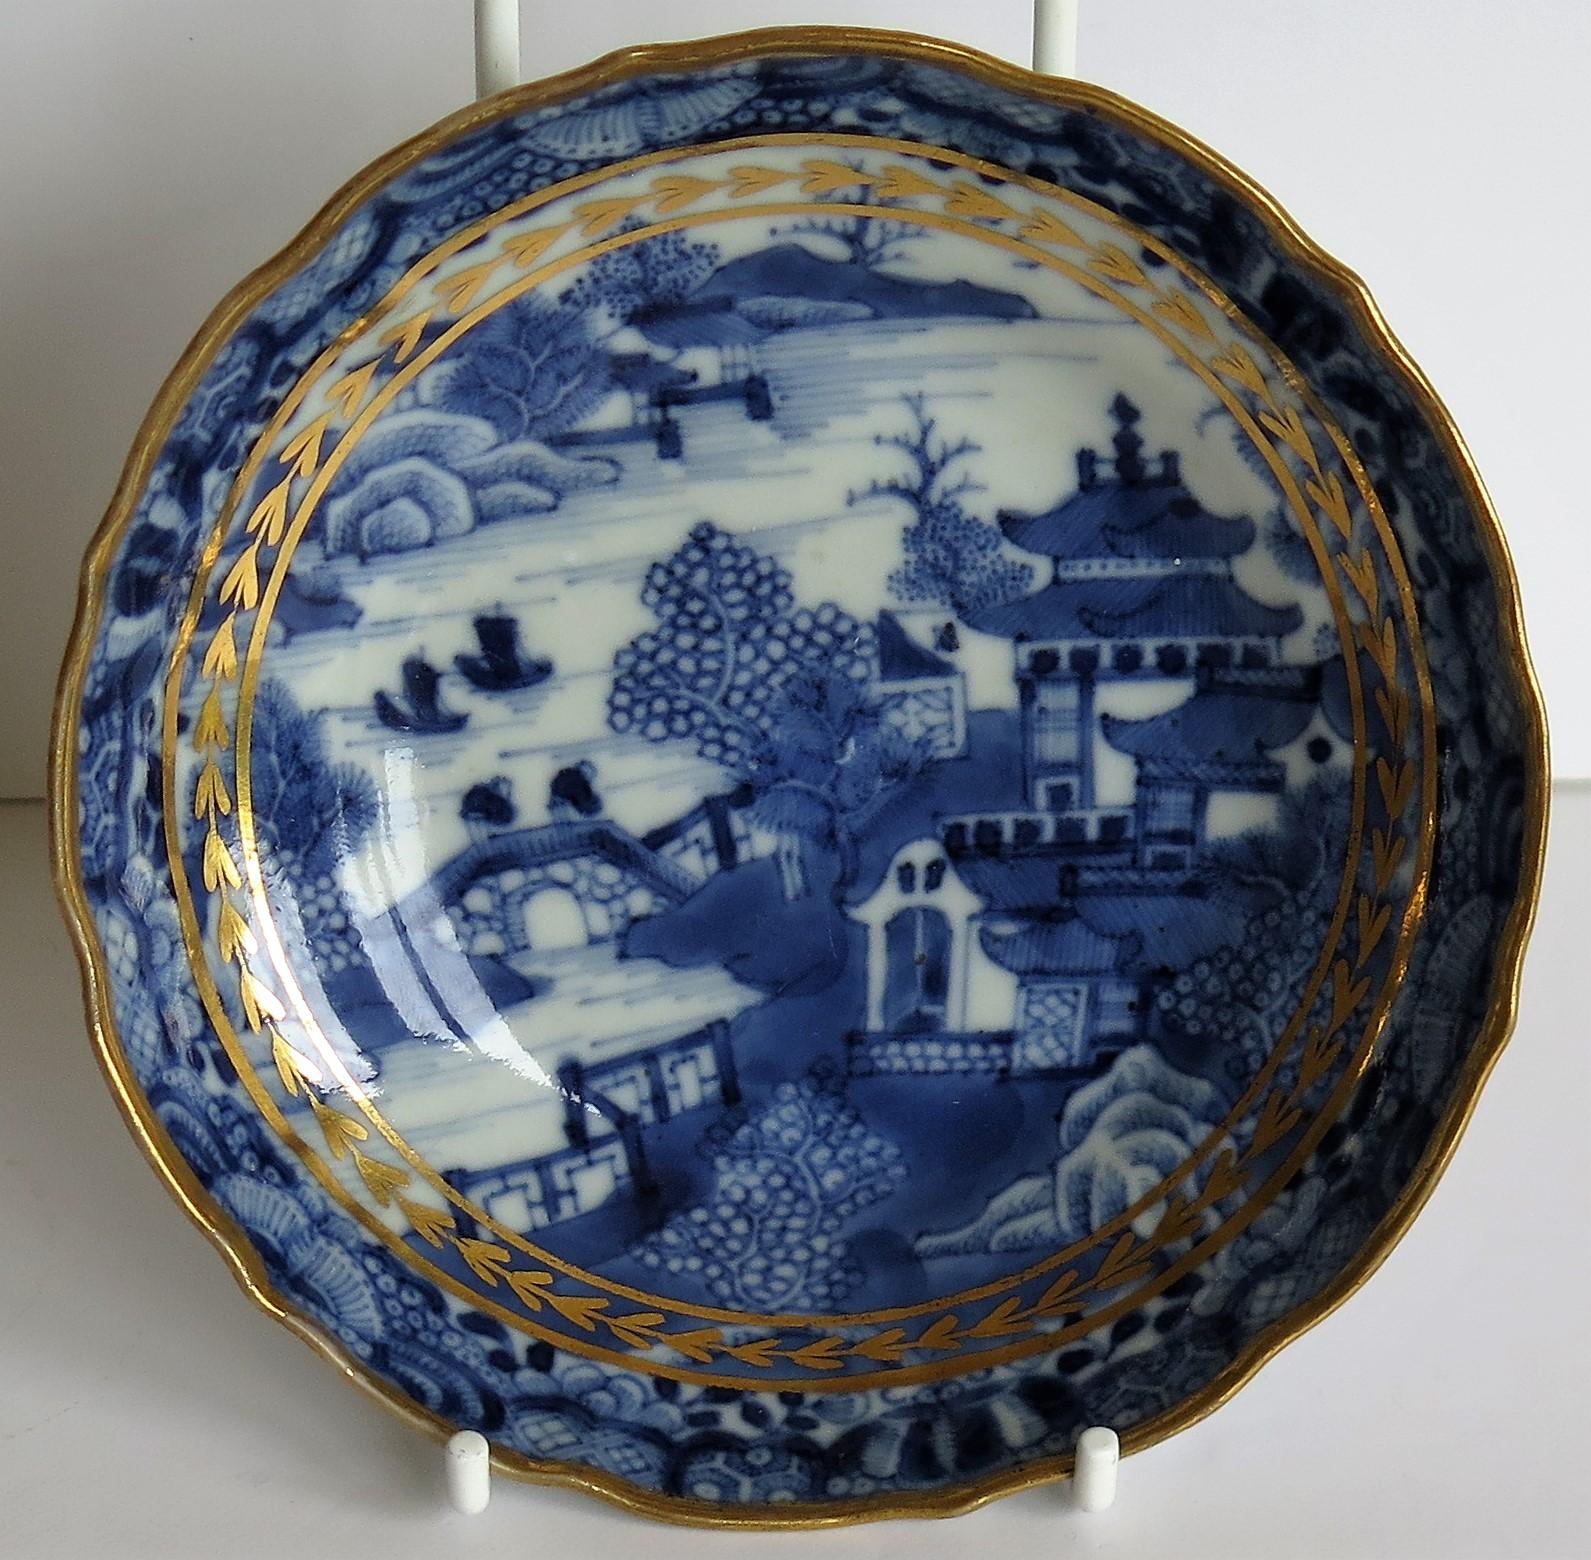 Glazed Chinese Export Porcelain Berry Bowl or Dish Blue and White Gilded, Qing